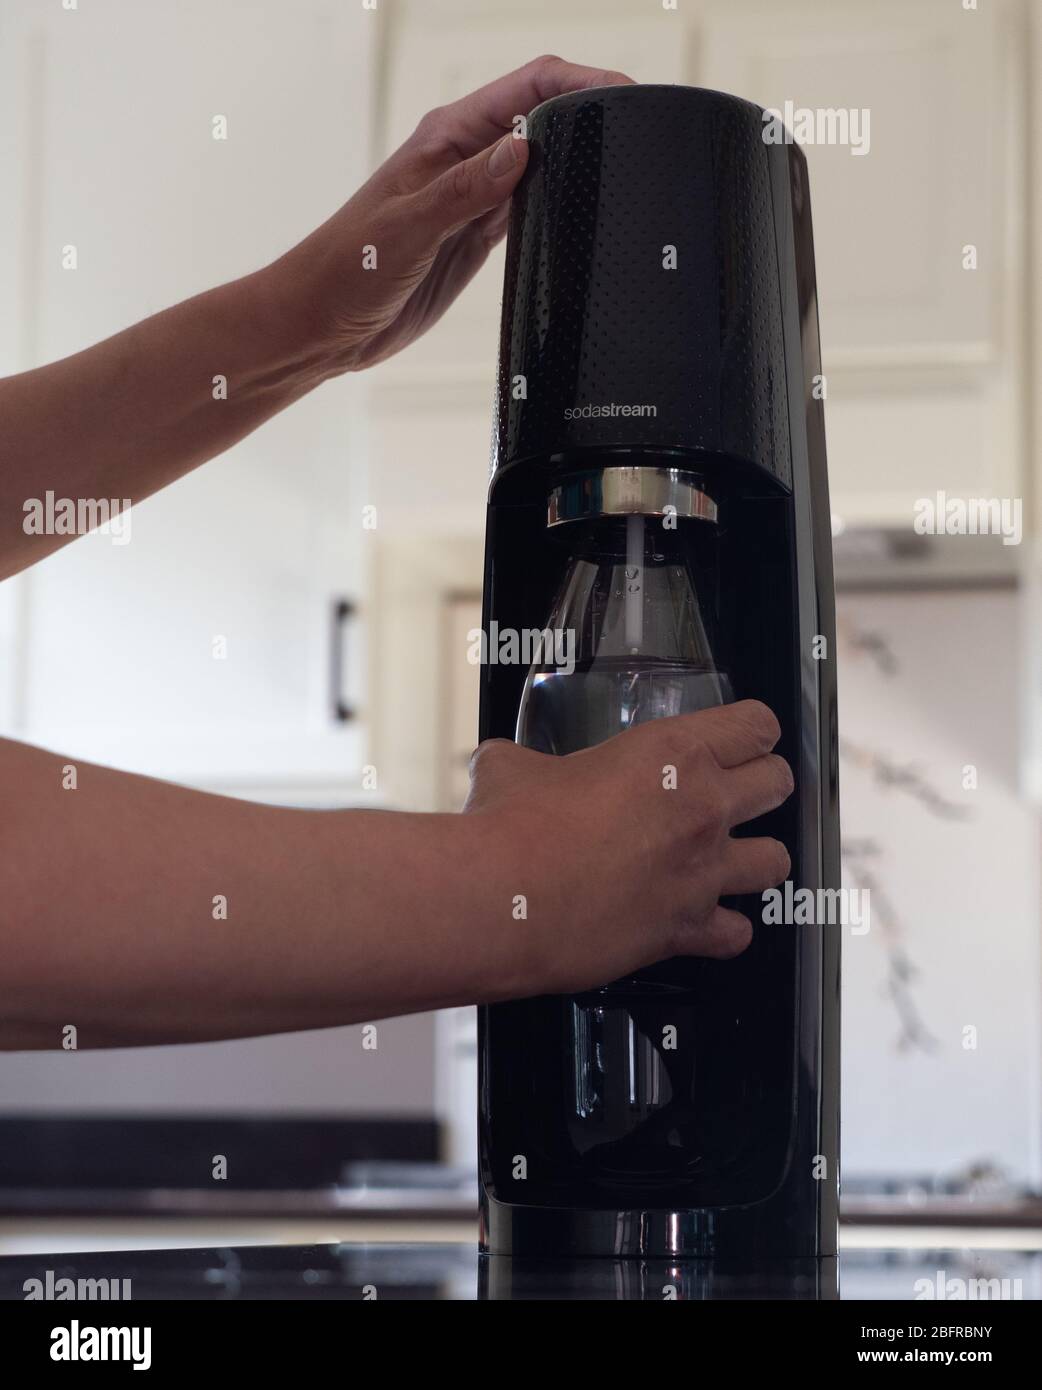 Latina woman using the Sodastream to carbonate water in a reusable plastic bottle in a modern kitchen with off white cabinets in the background. Stock Photo